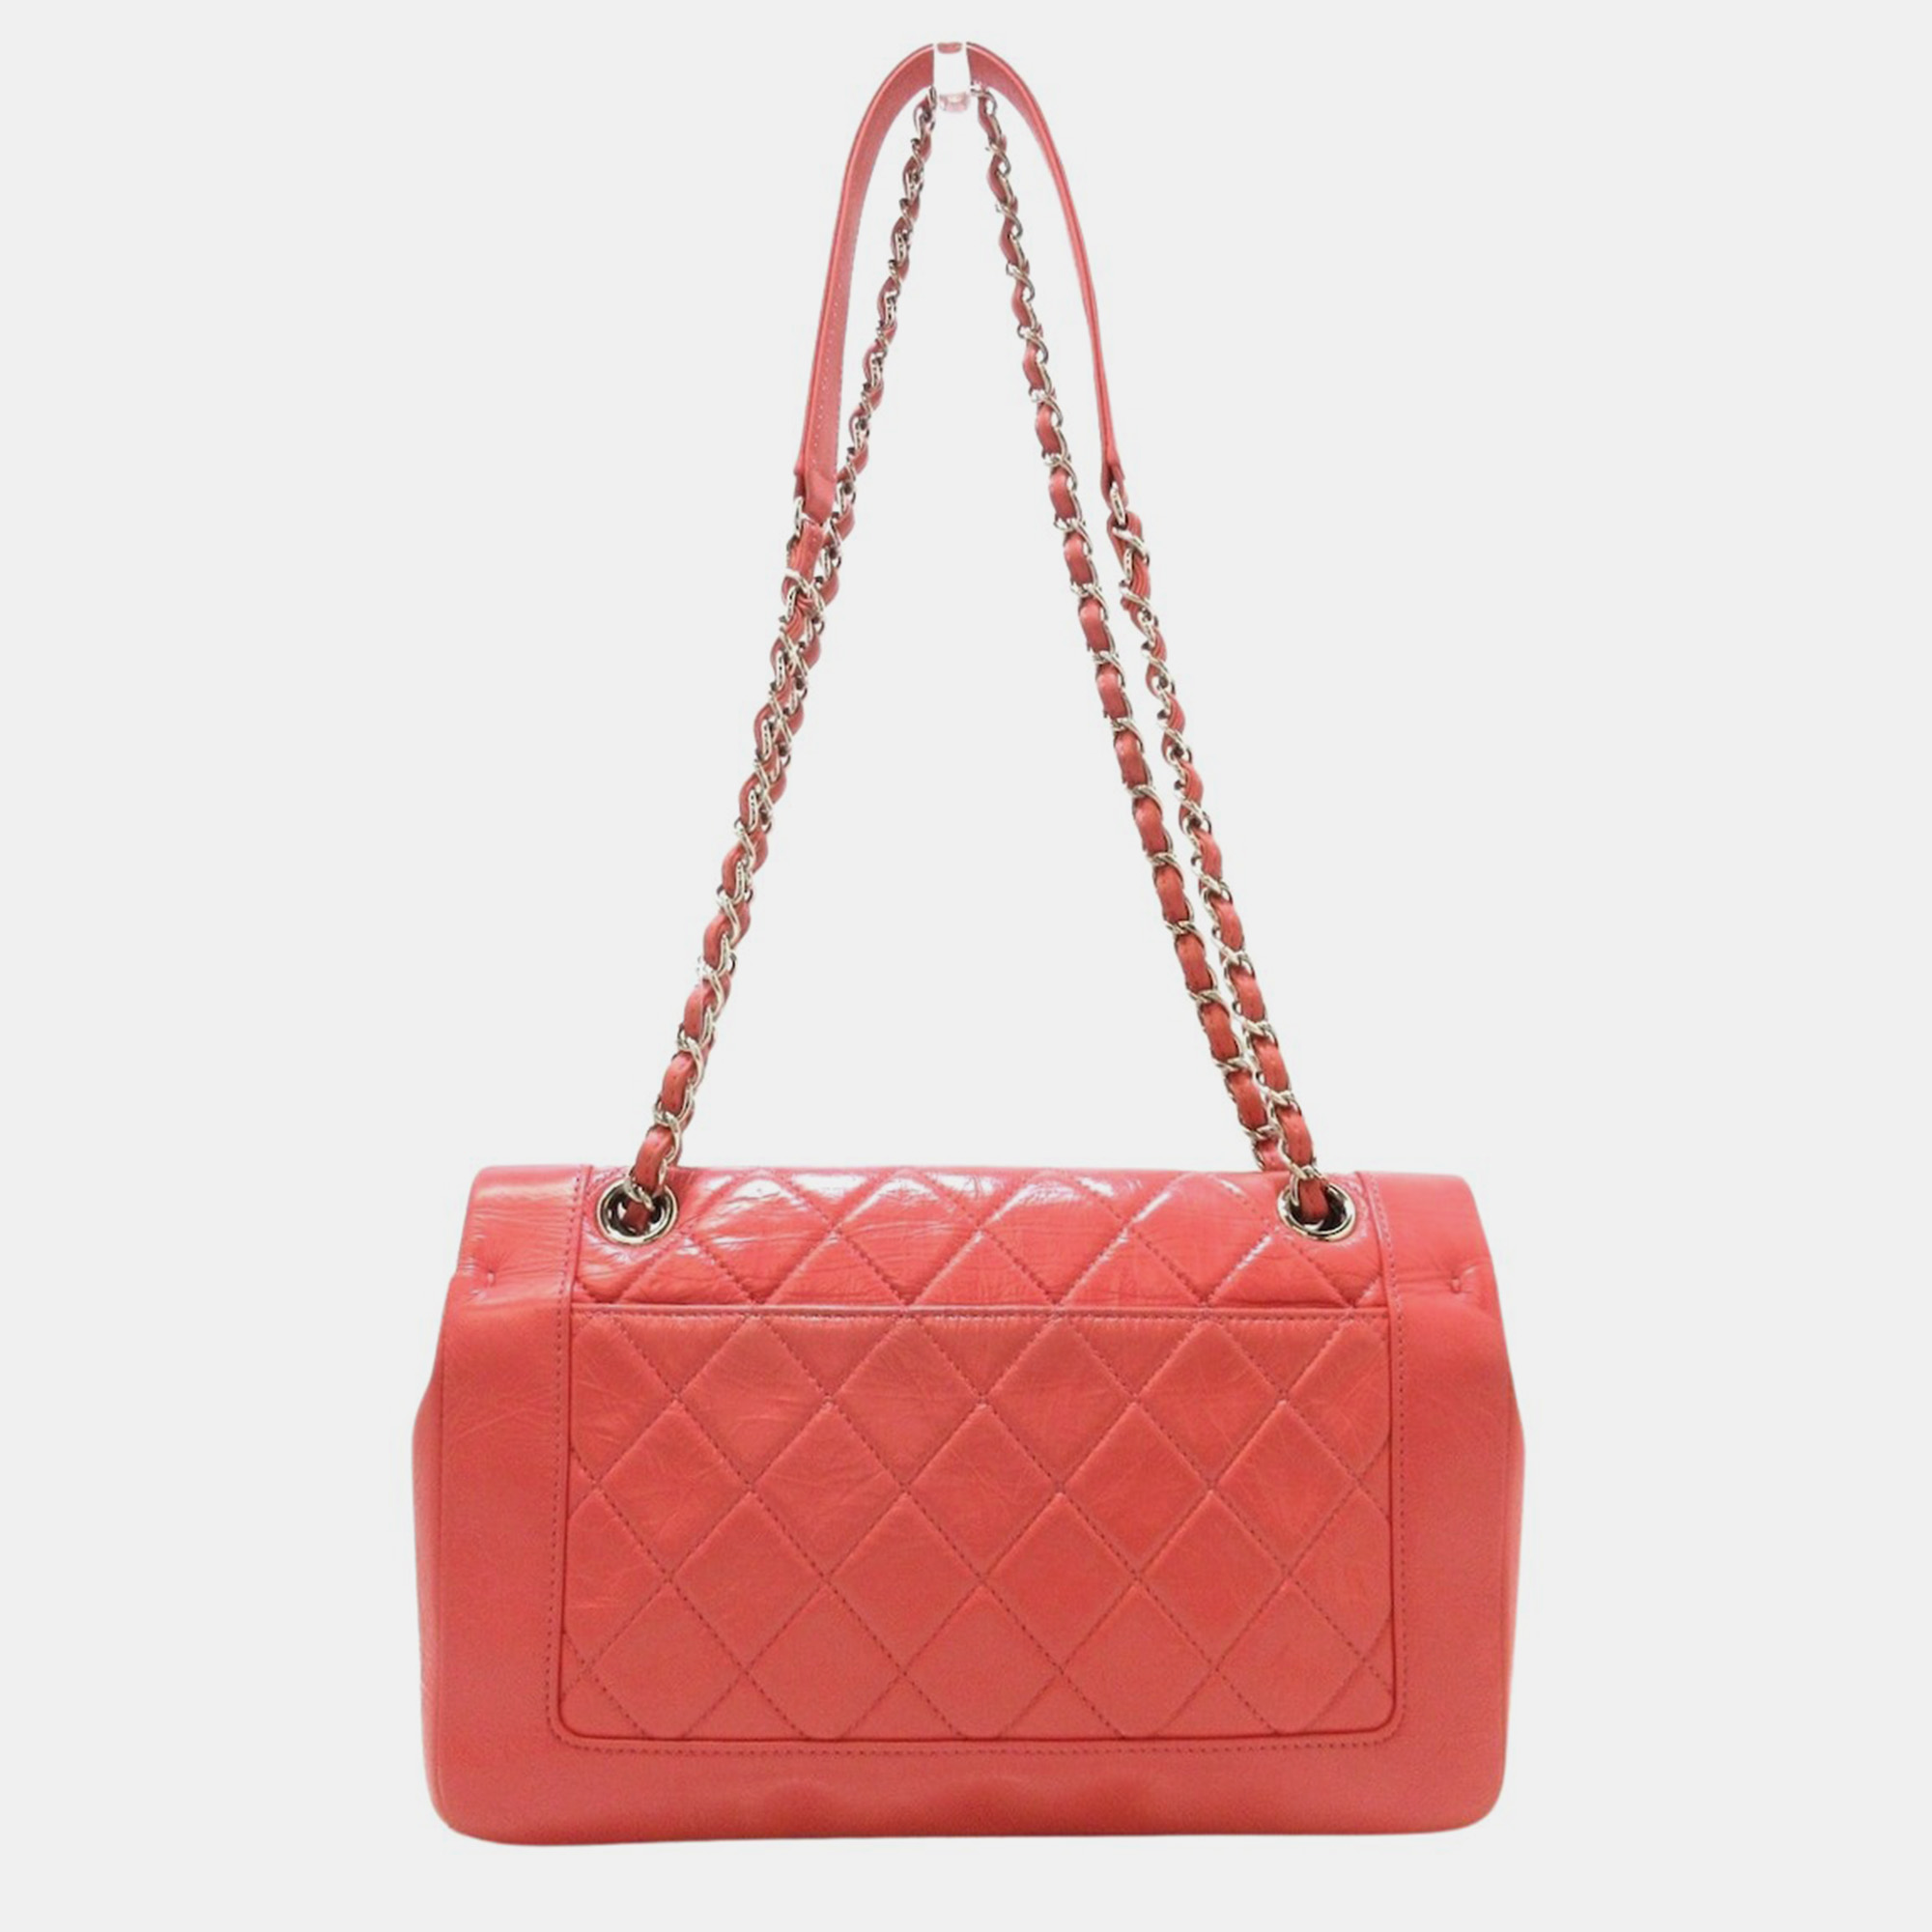 Chanel Pink Leather CC Flap Bag